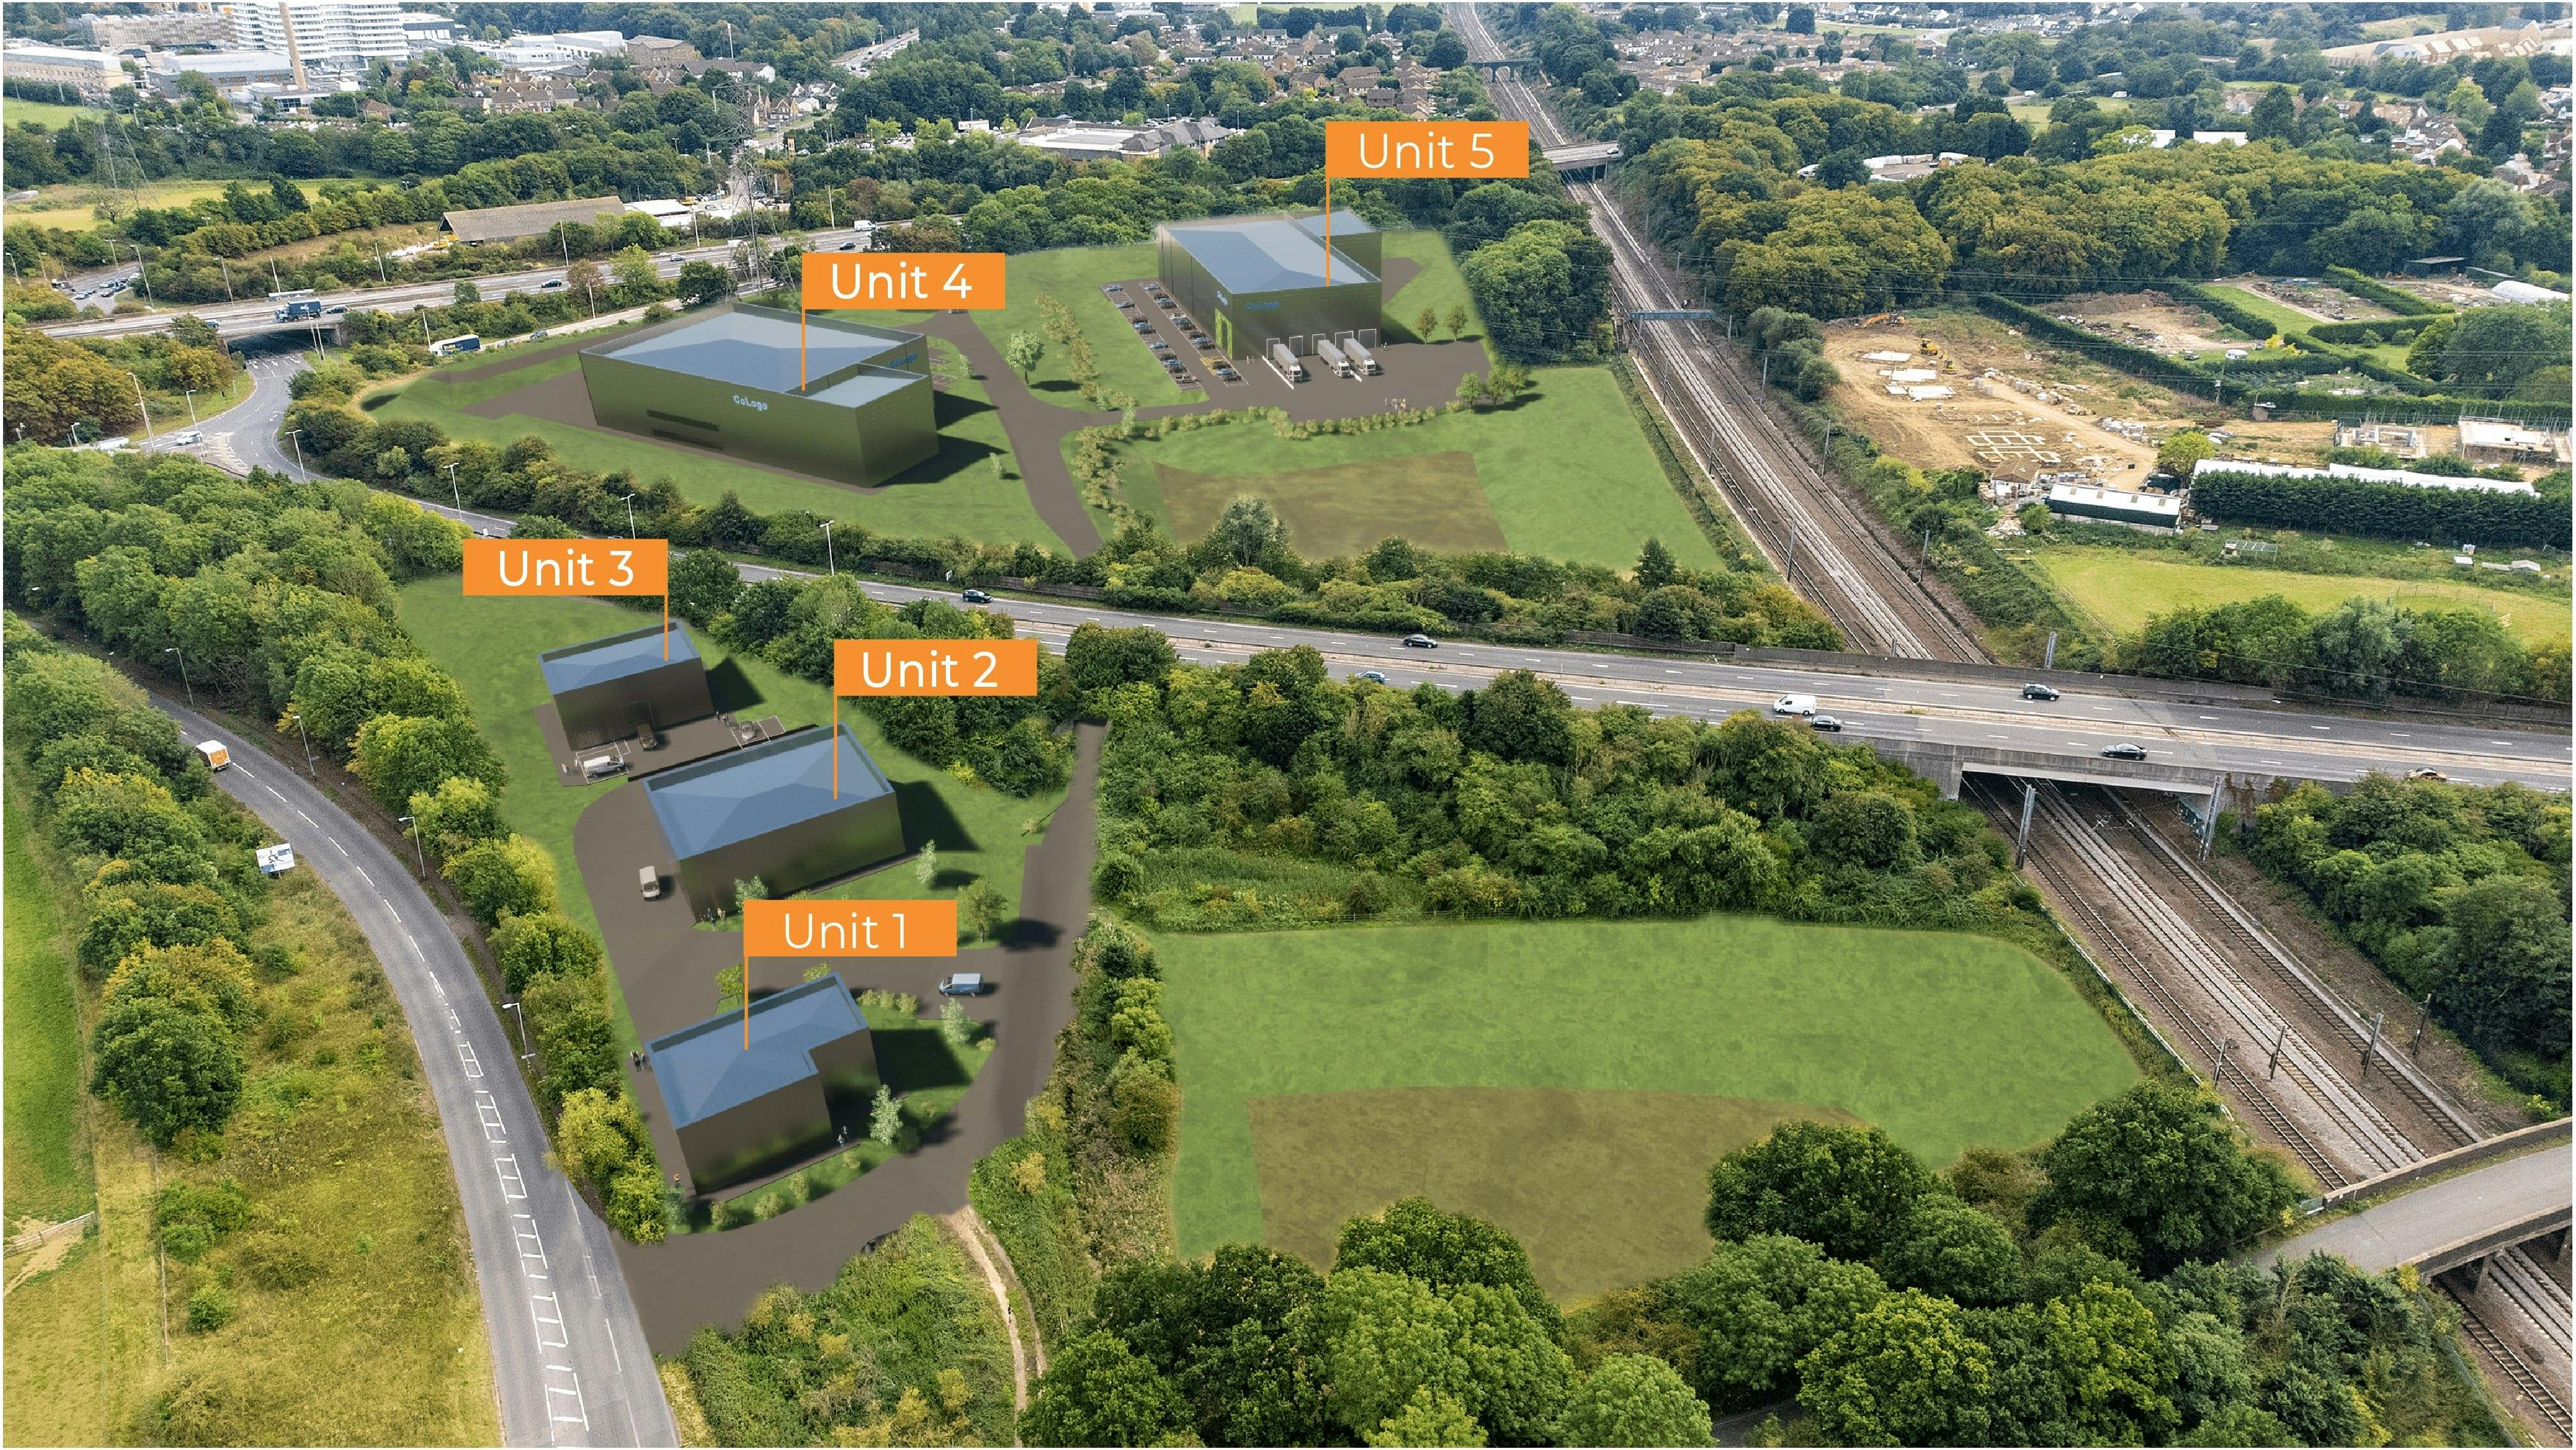 Stevenage Northern Gateway Overview Image with labels